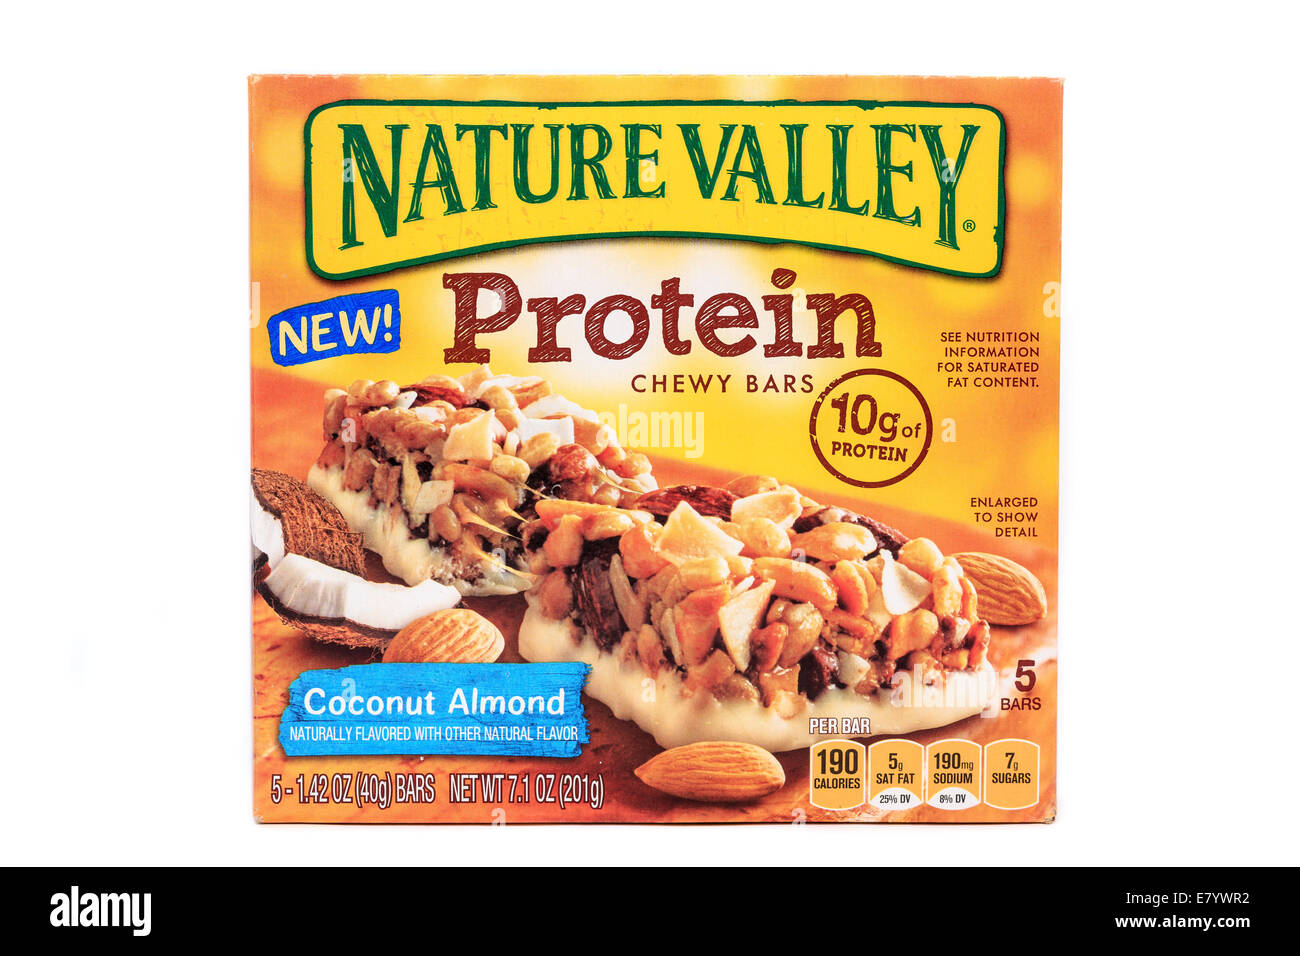 Nature Valley Coconut Almond Chewy Protein Bars Stock Photo